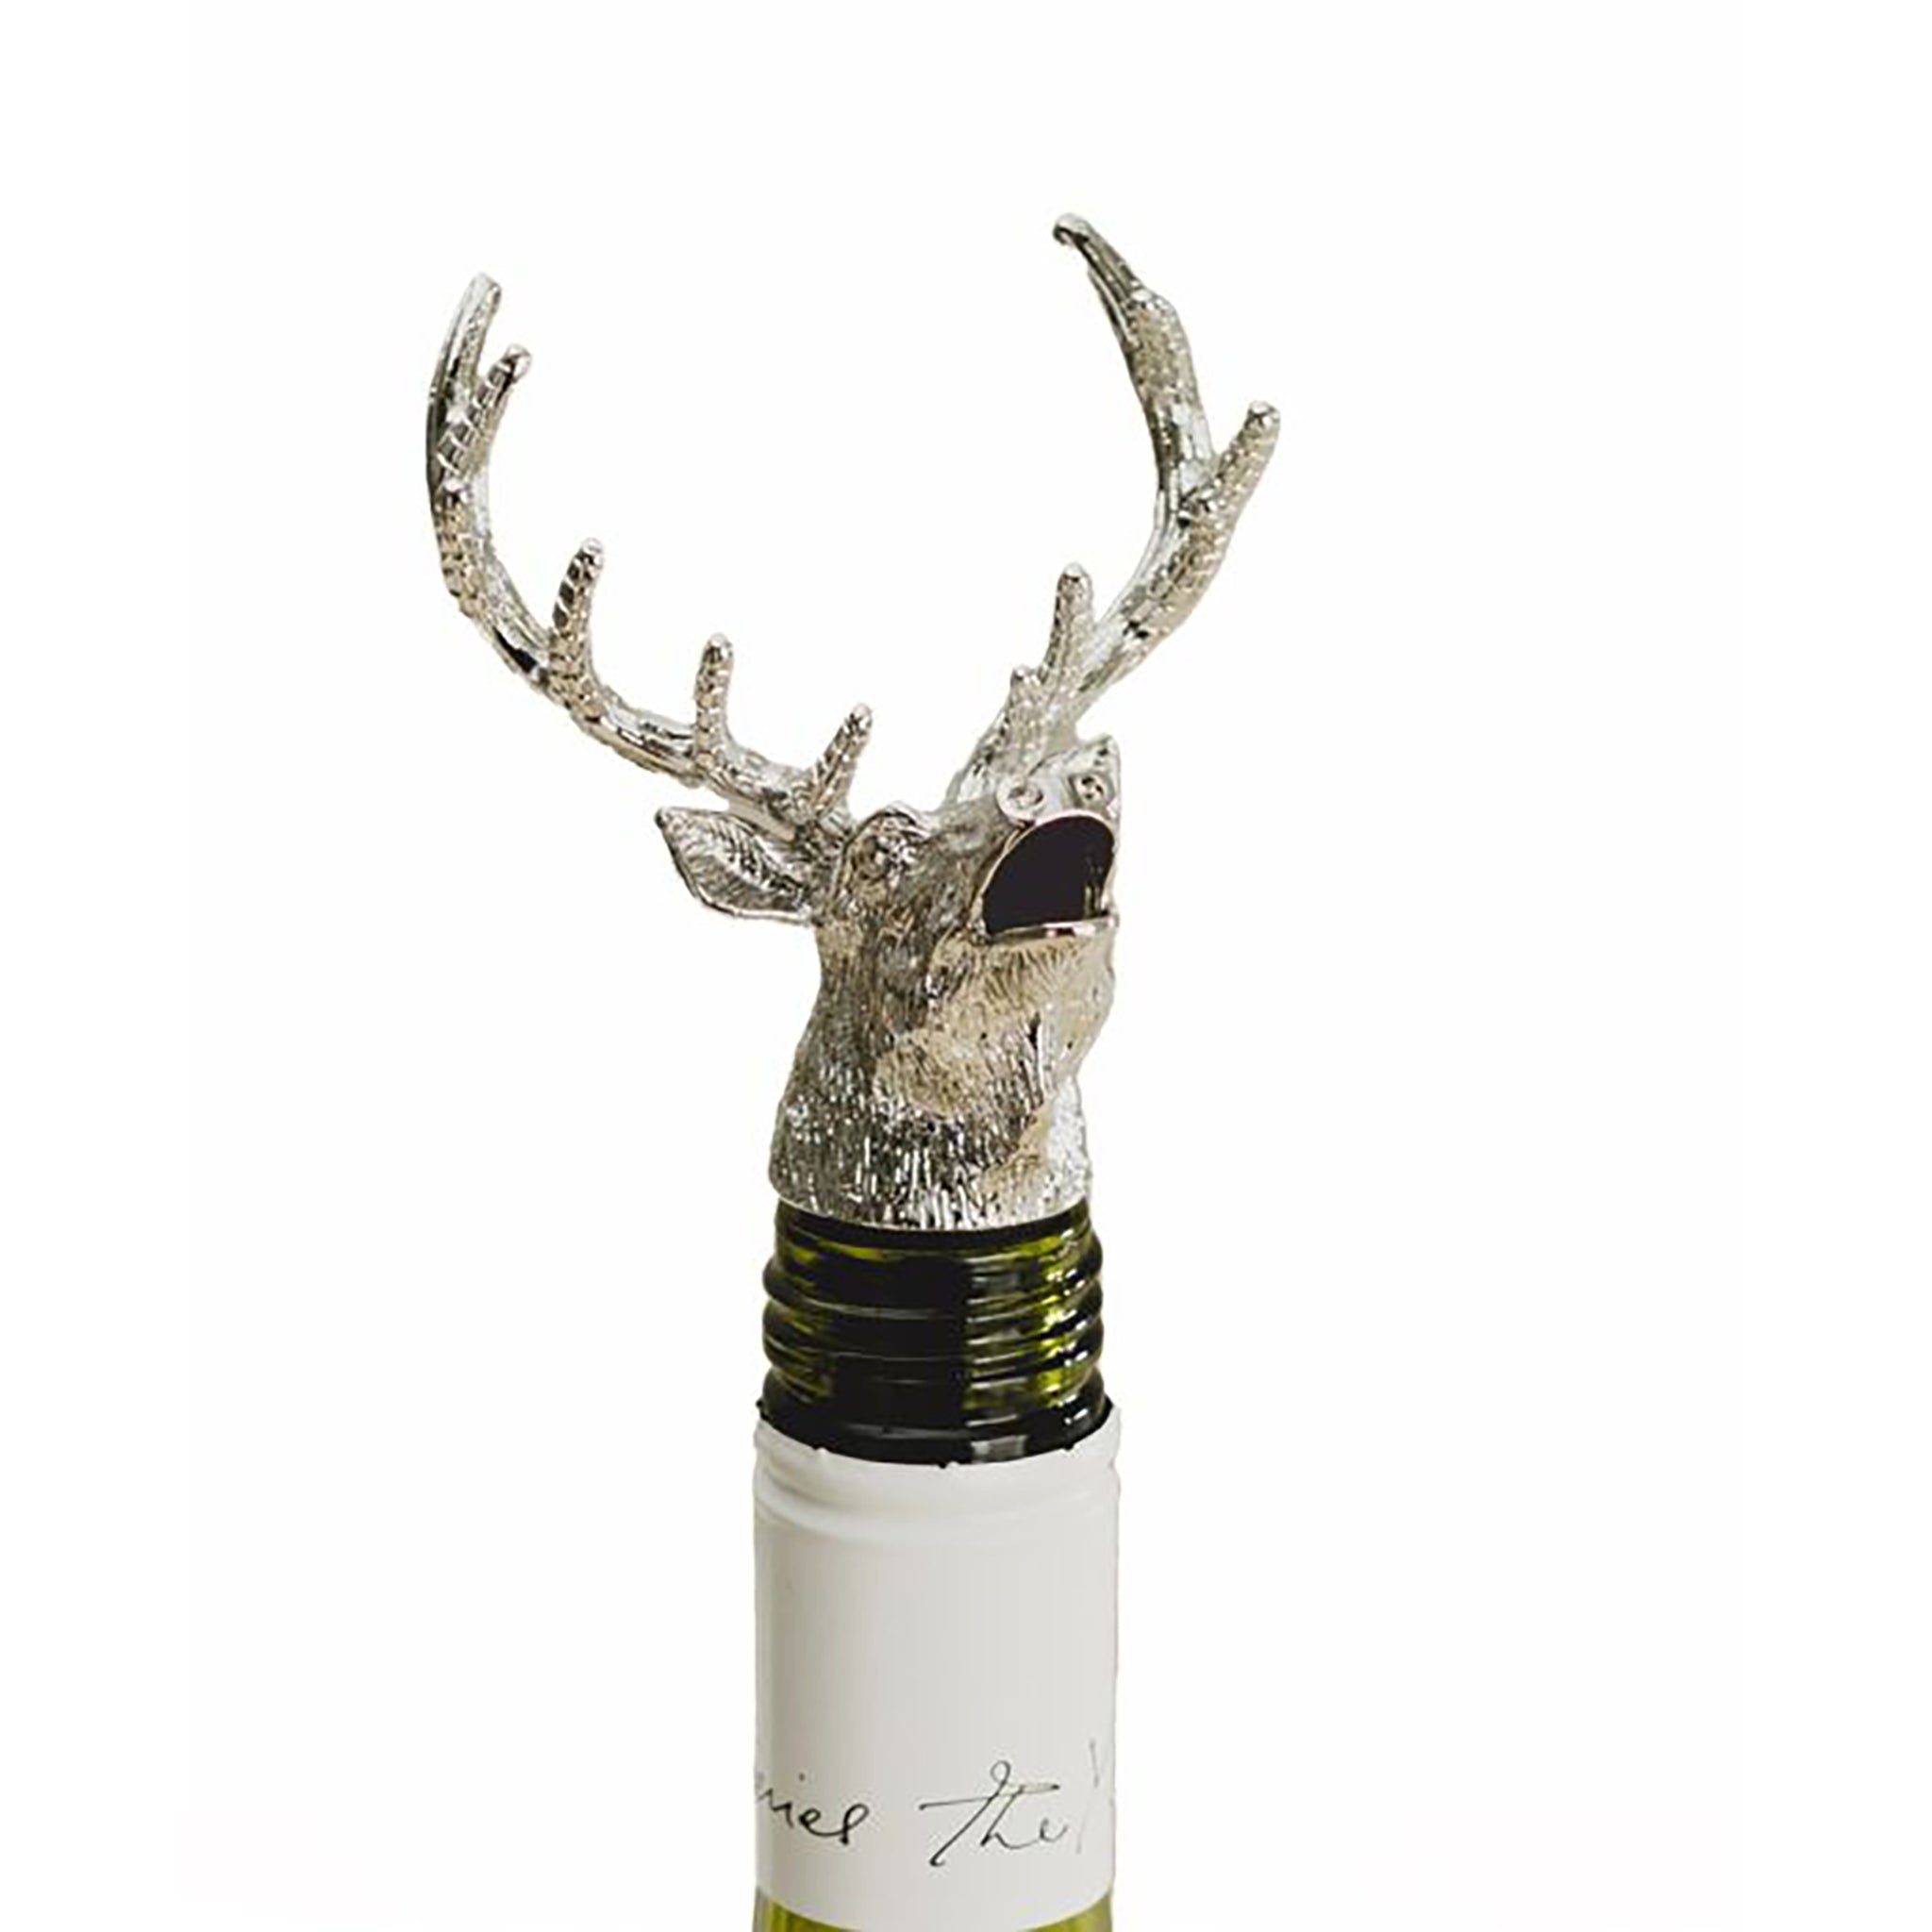 A wine pourer with silver stag head on a bottle